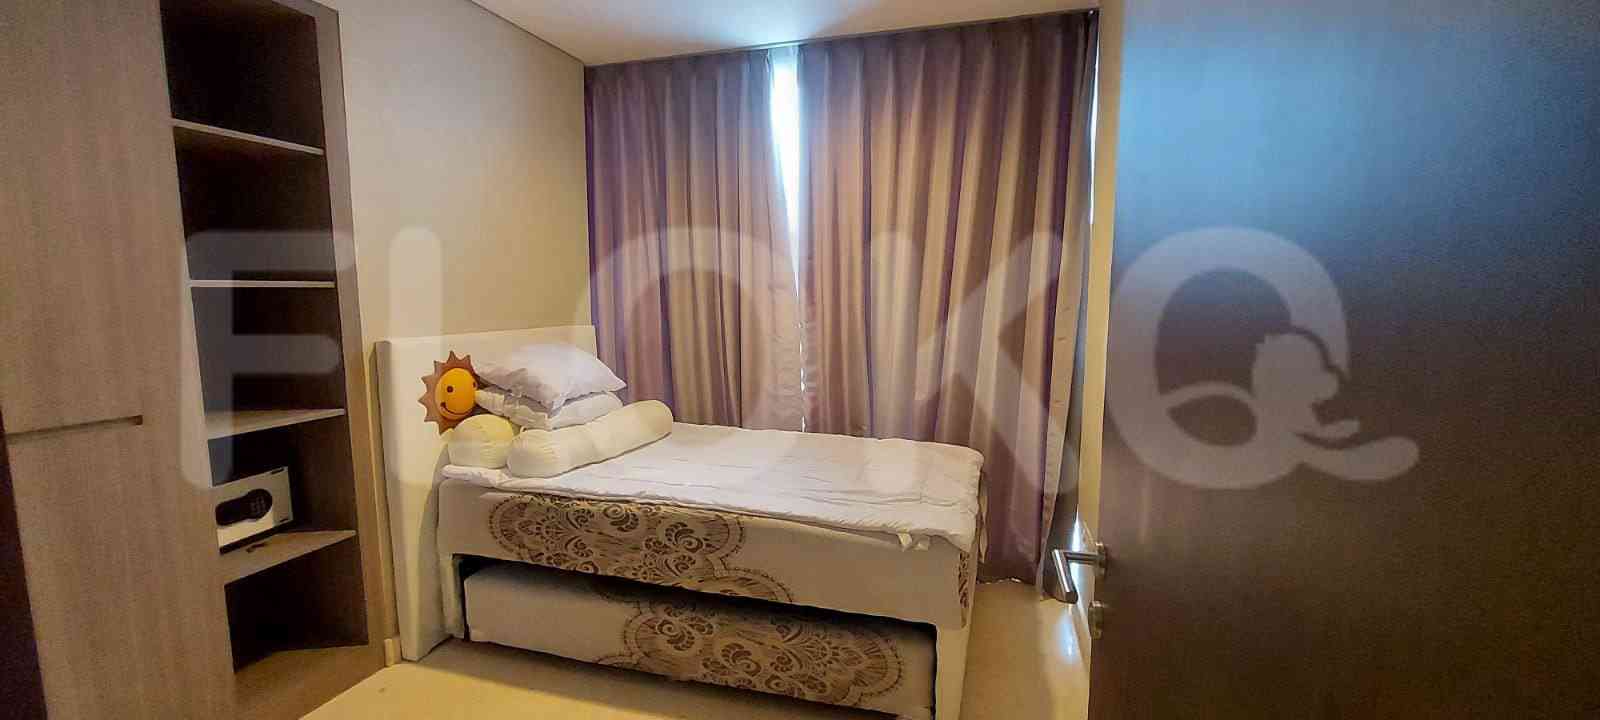 2 Bedroom on 23rd Floor for Rent in Ciputra World 2 Apartment - fku5a3 5